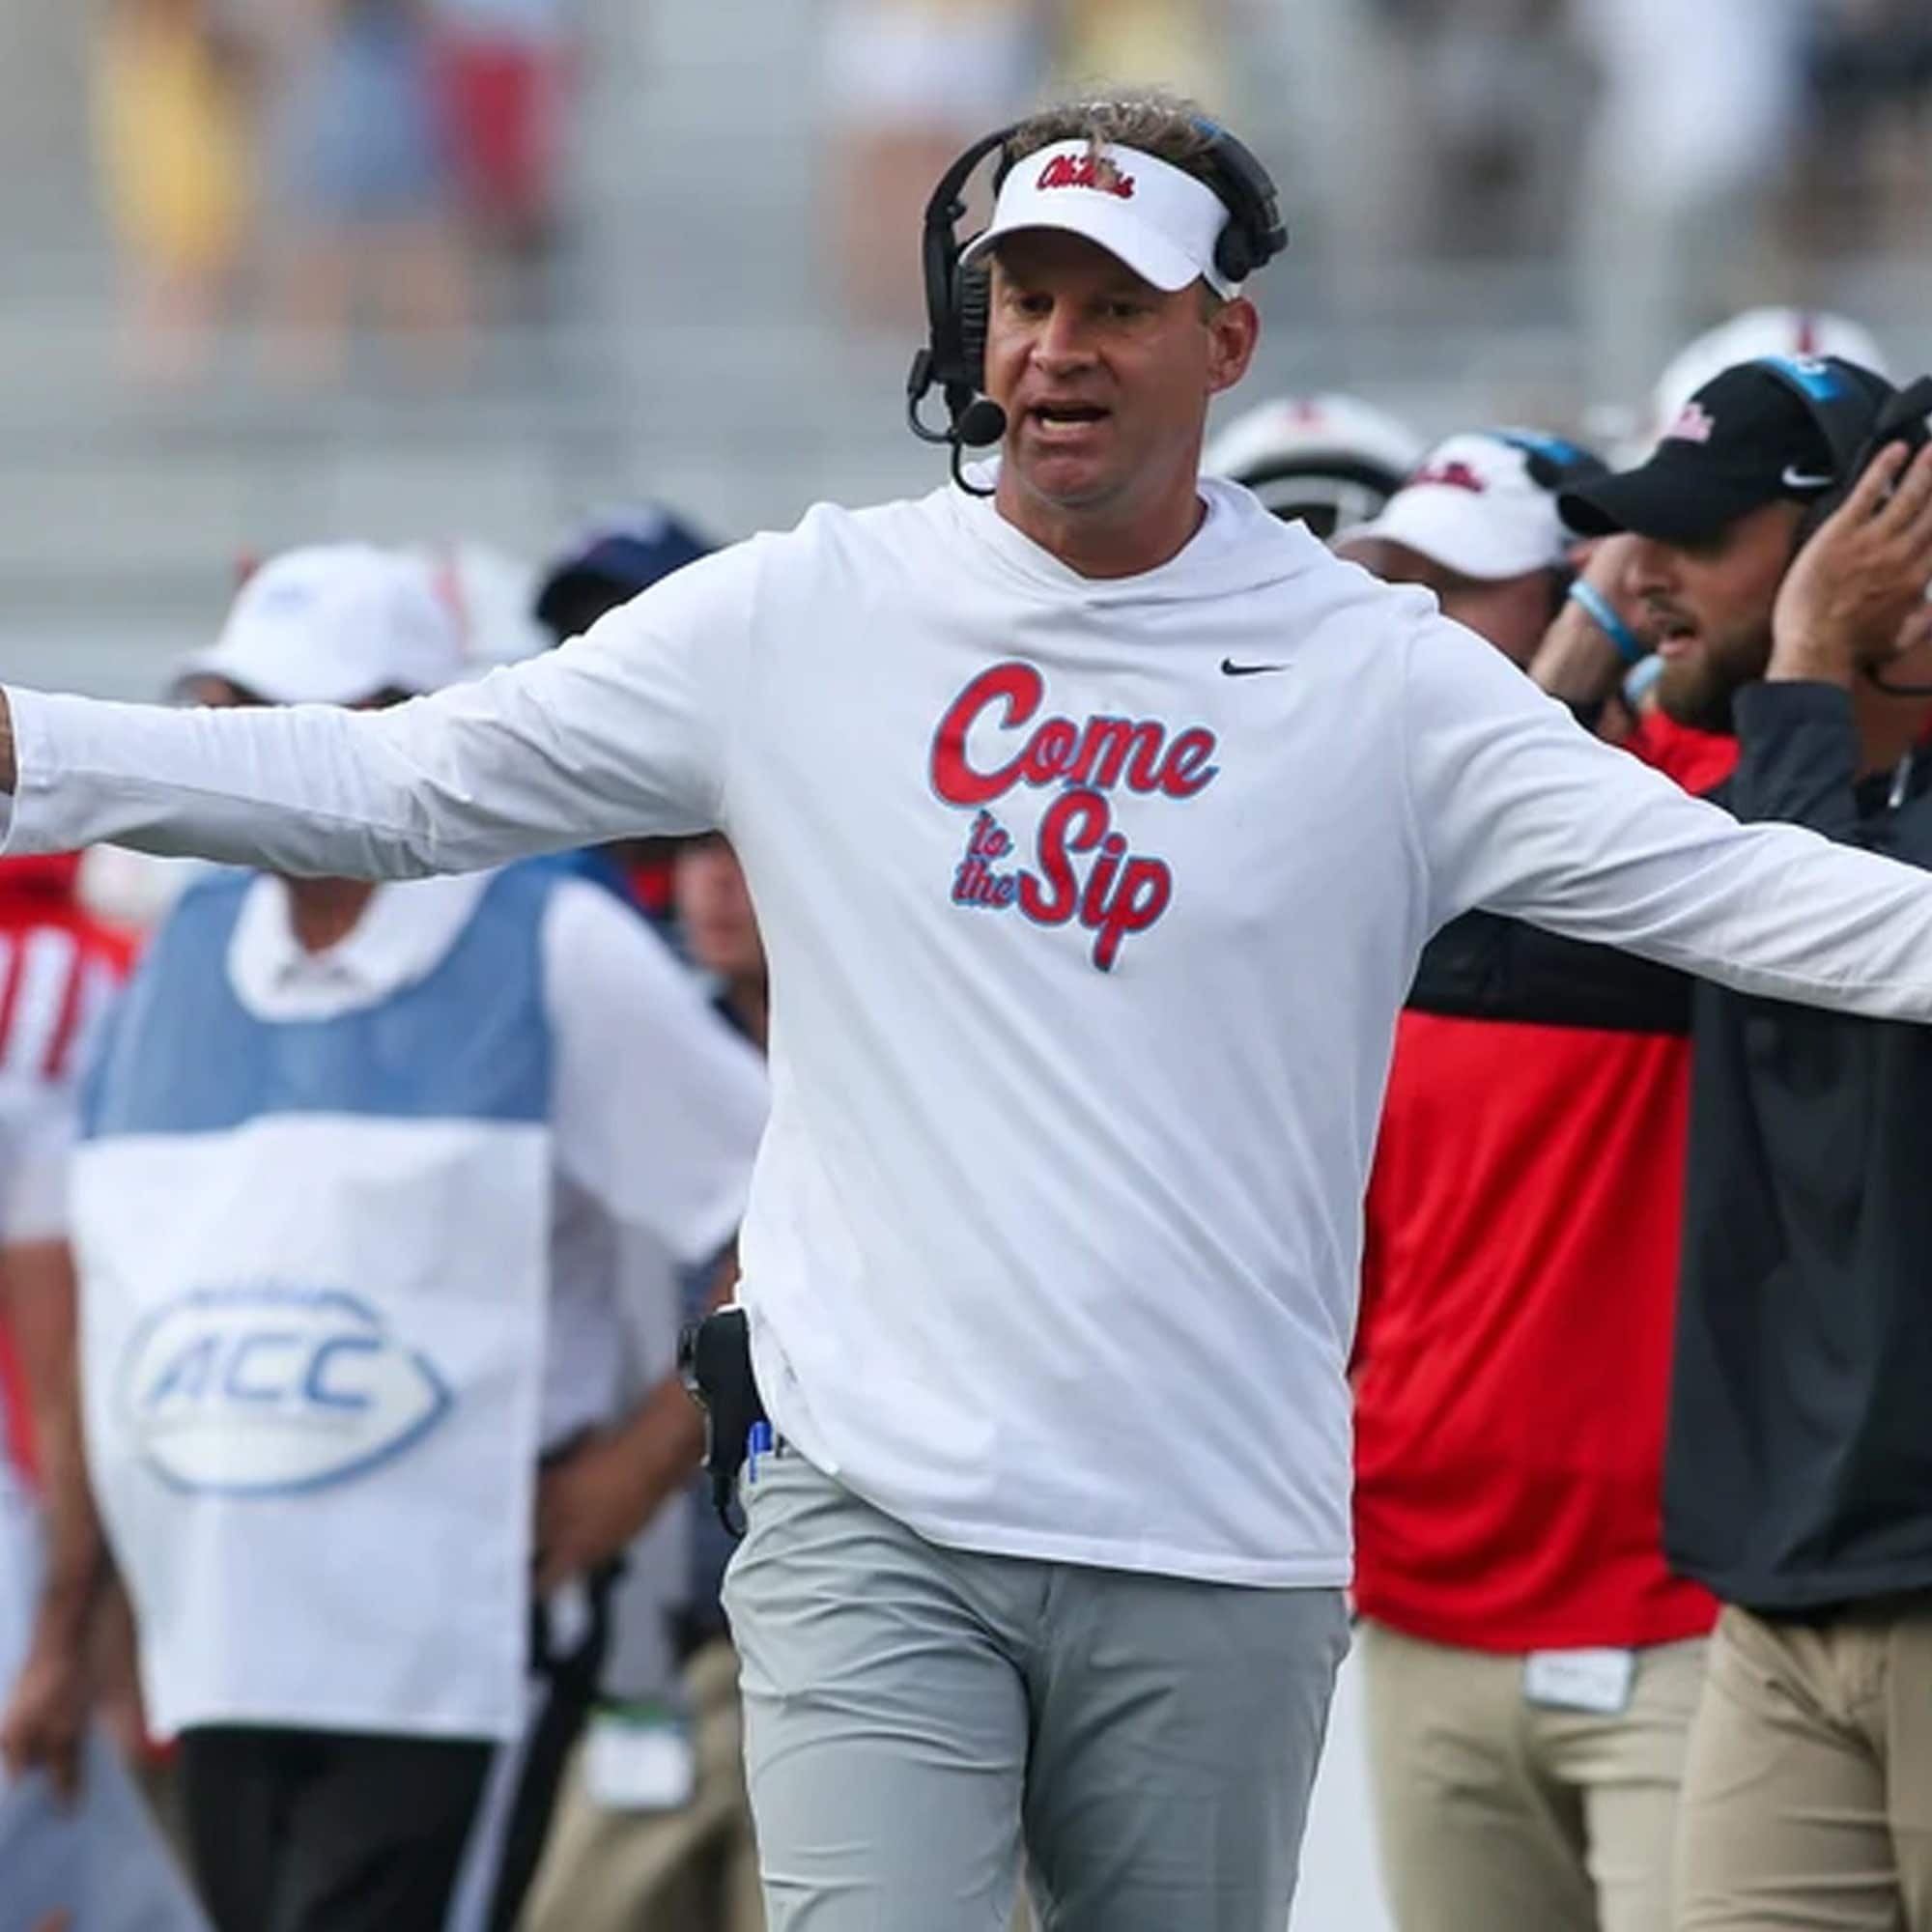 Come To The Sip Lane Kiffin Shirt,Lane Kiffin Come To The Sip Shirt